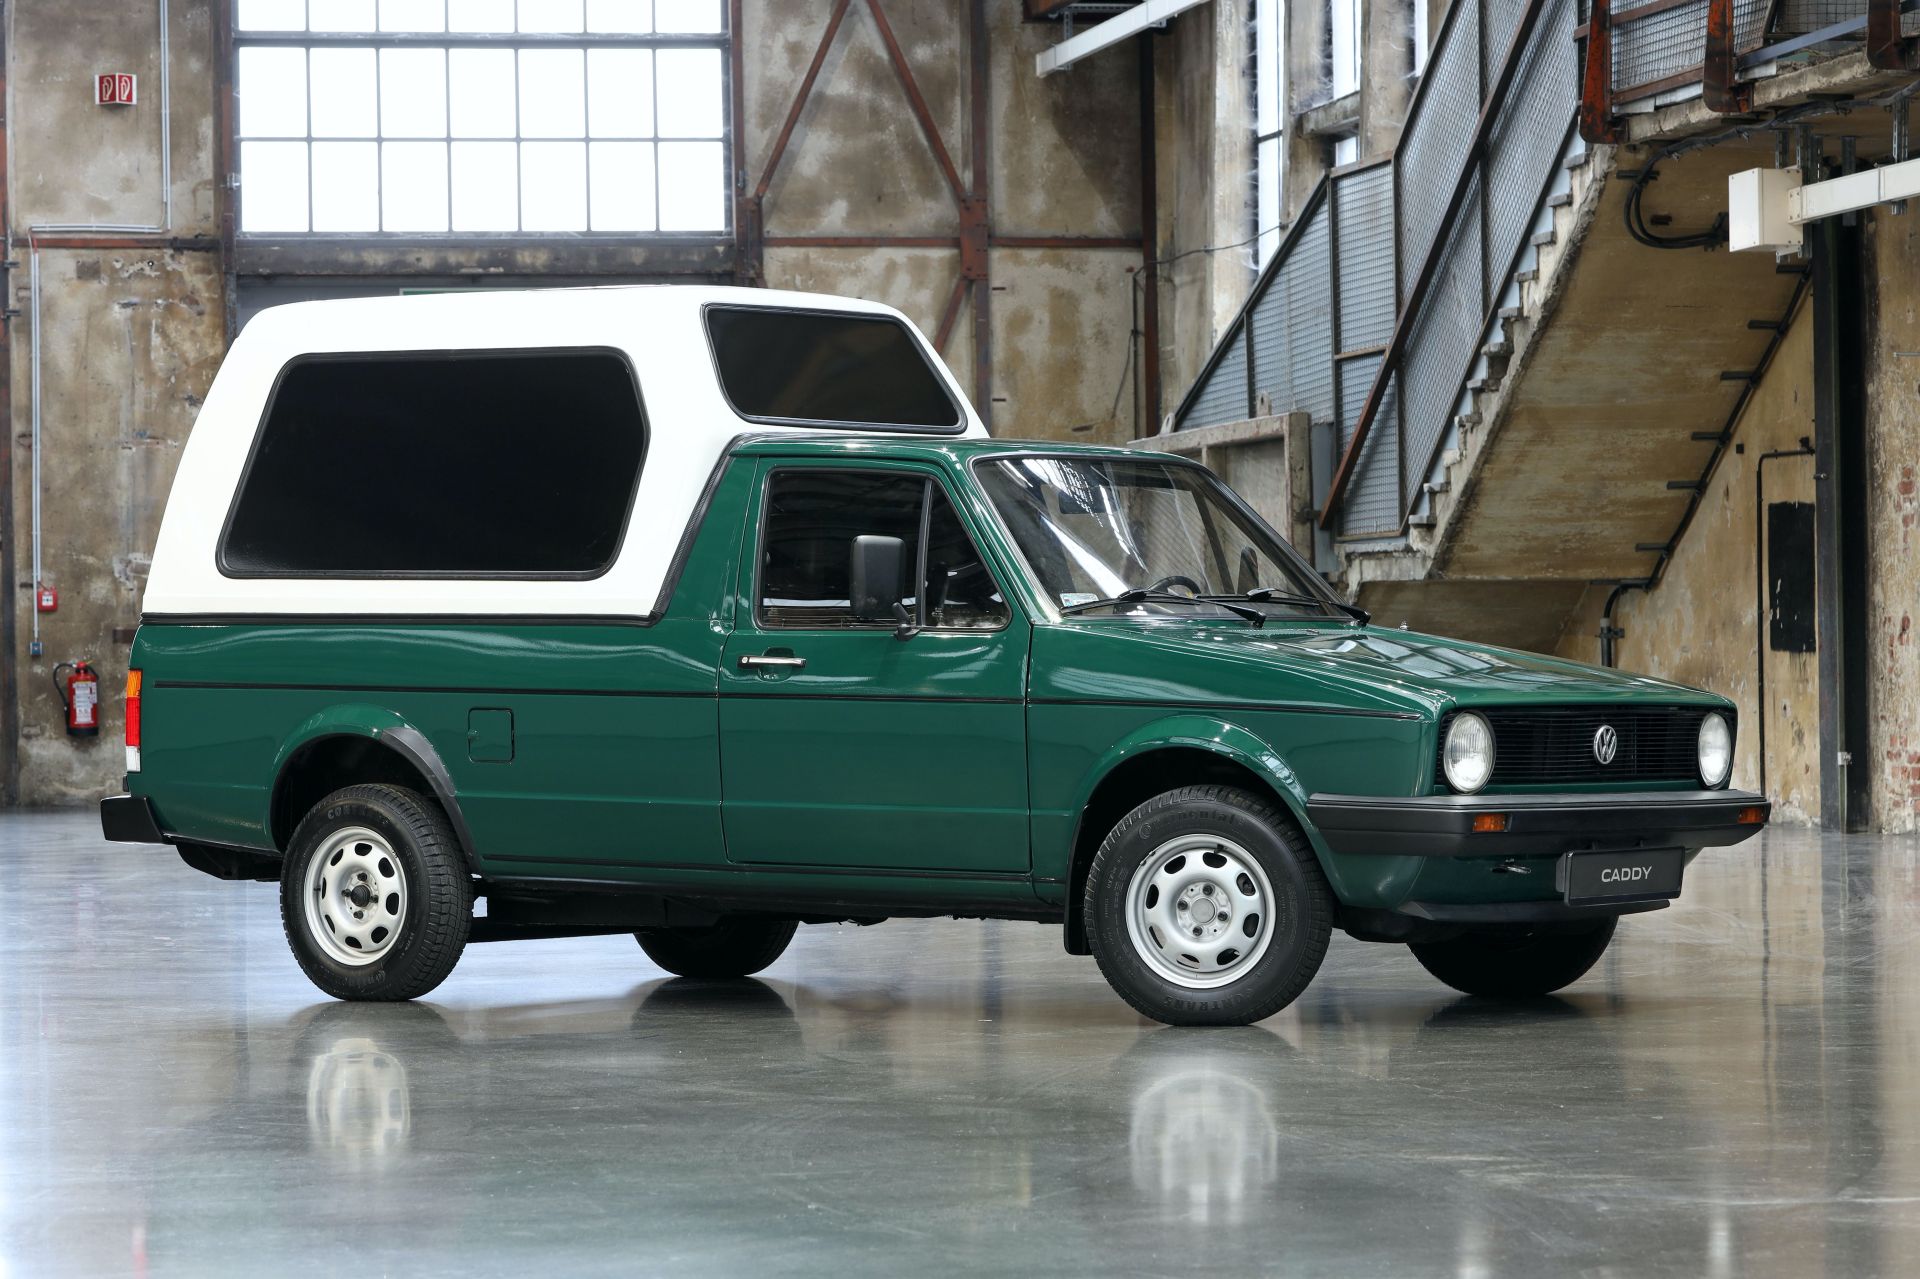 https://www.carscoops.com/wp-content/uploads/2020/04/First-generation-VW-Caddy.jpg